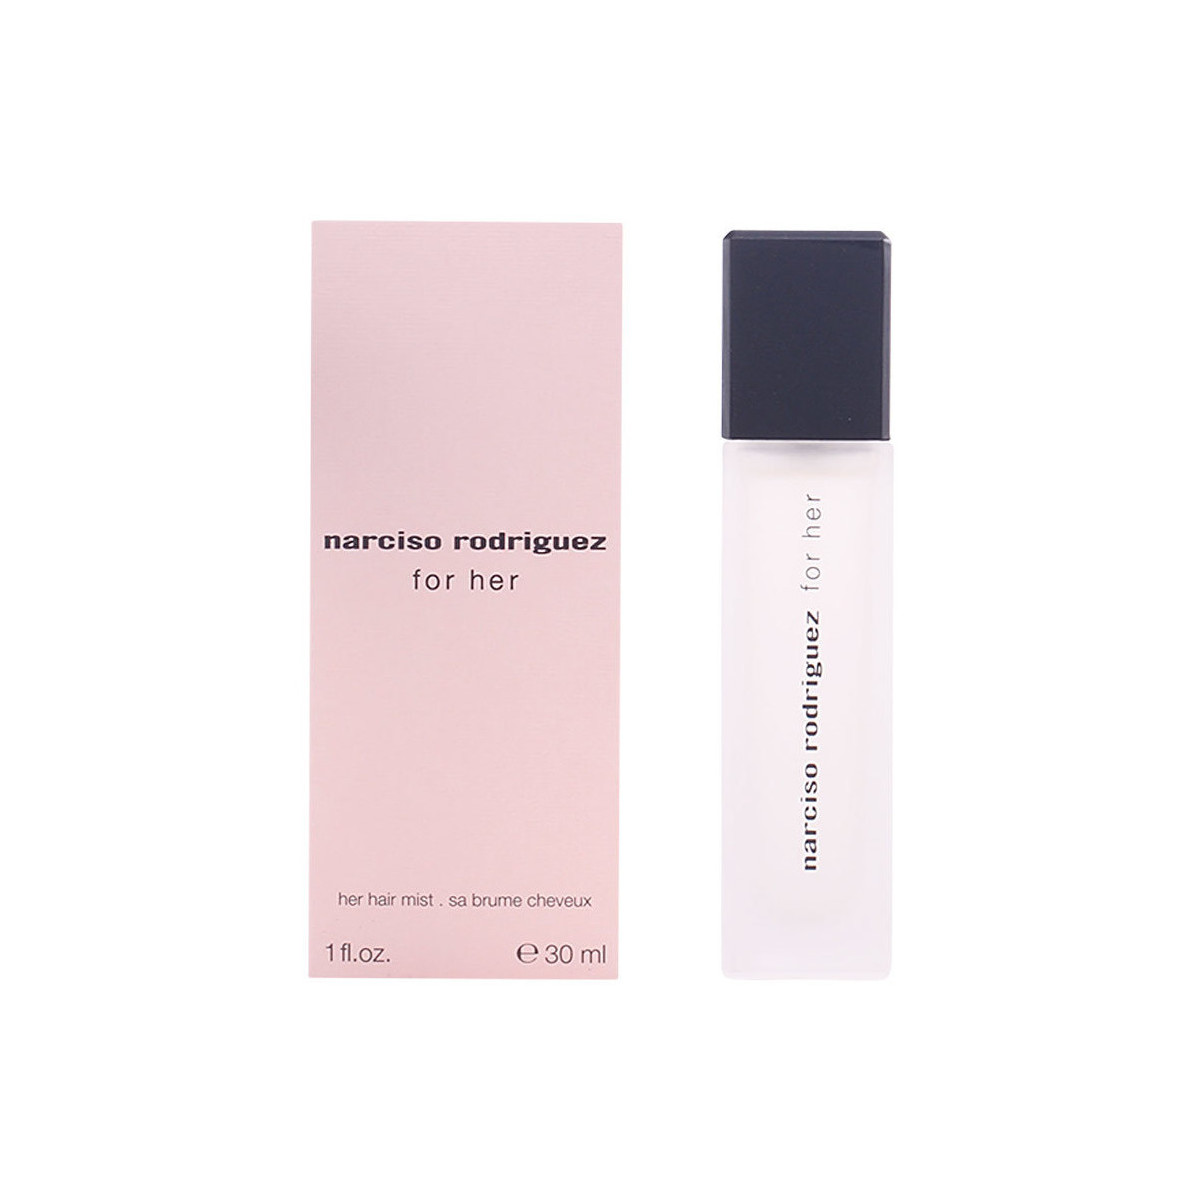 Belleza Mujer Perfume Narciso Rodriguez For Her Hair Mist 